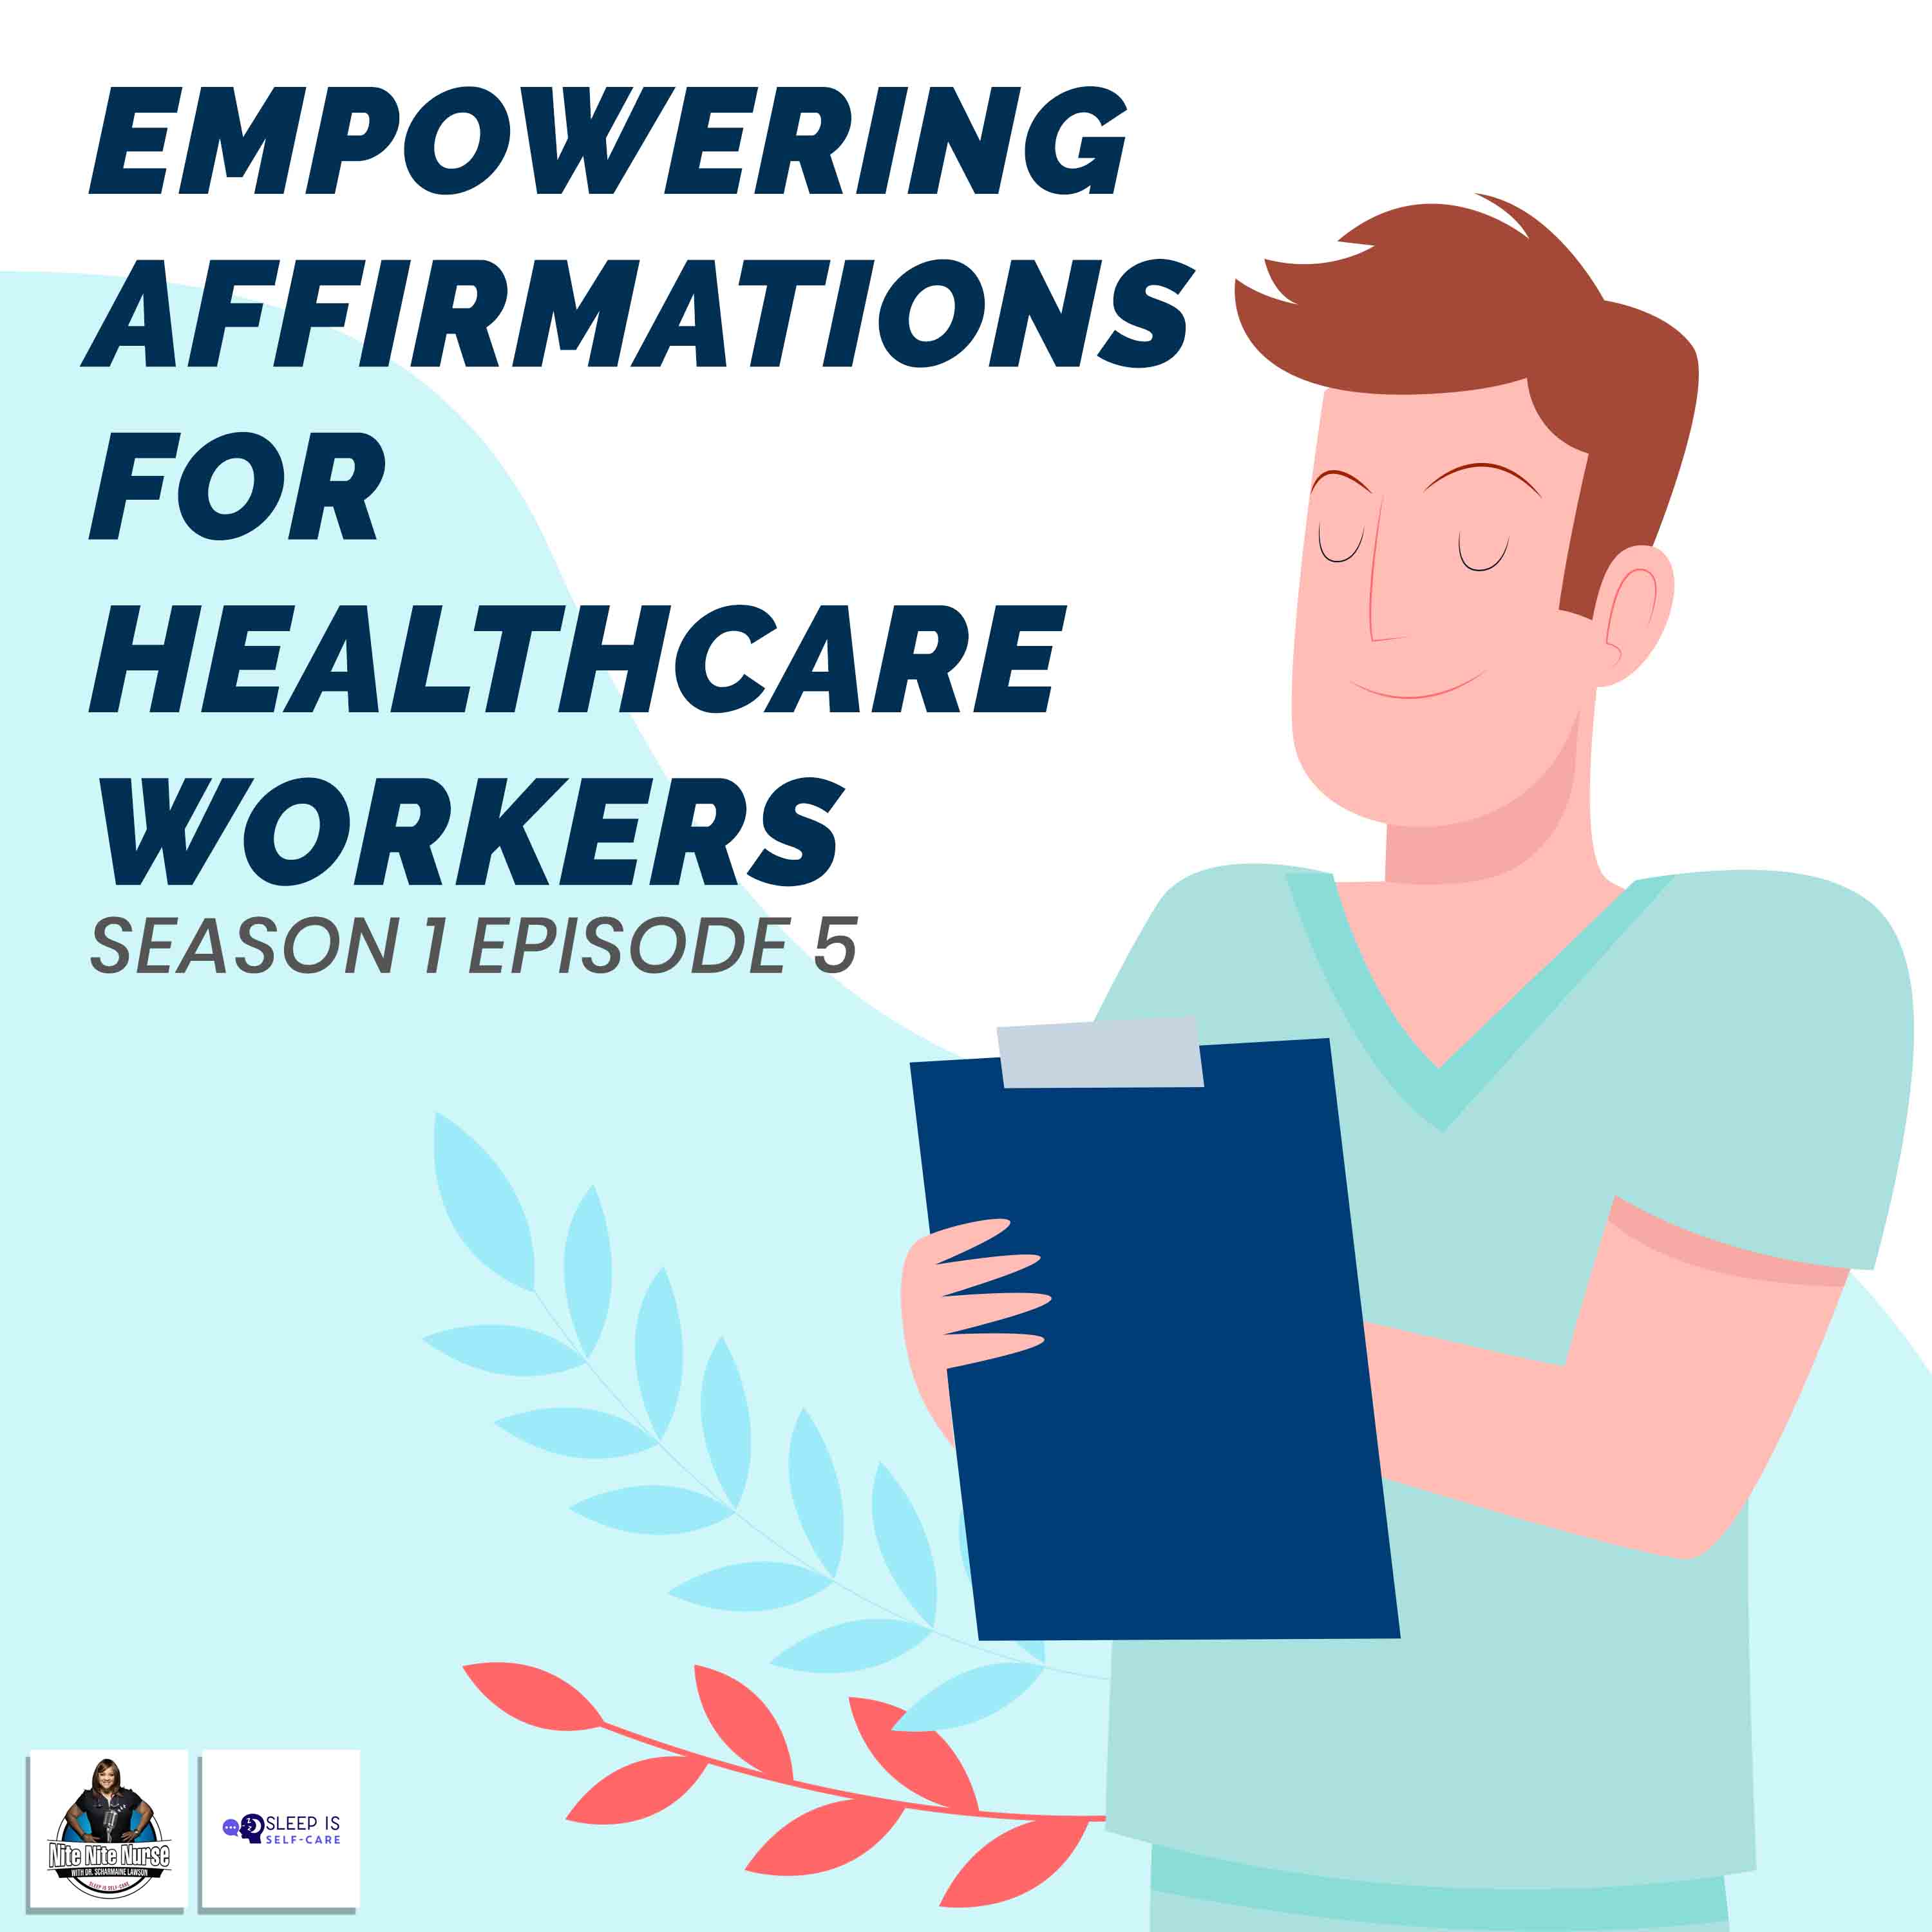 S1 Ep 5. Empowering Affirmations for Healthcare Workers: A Guided Meditation for Strength and Encouragement